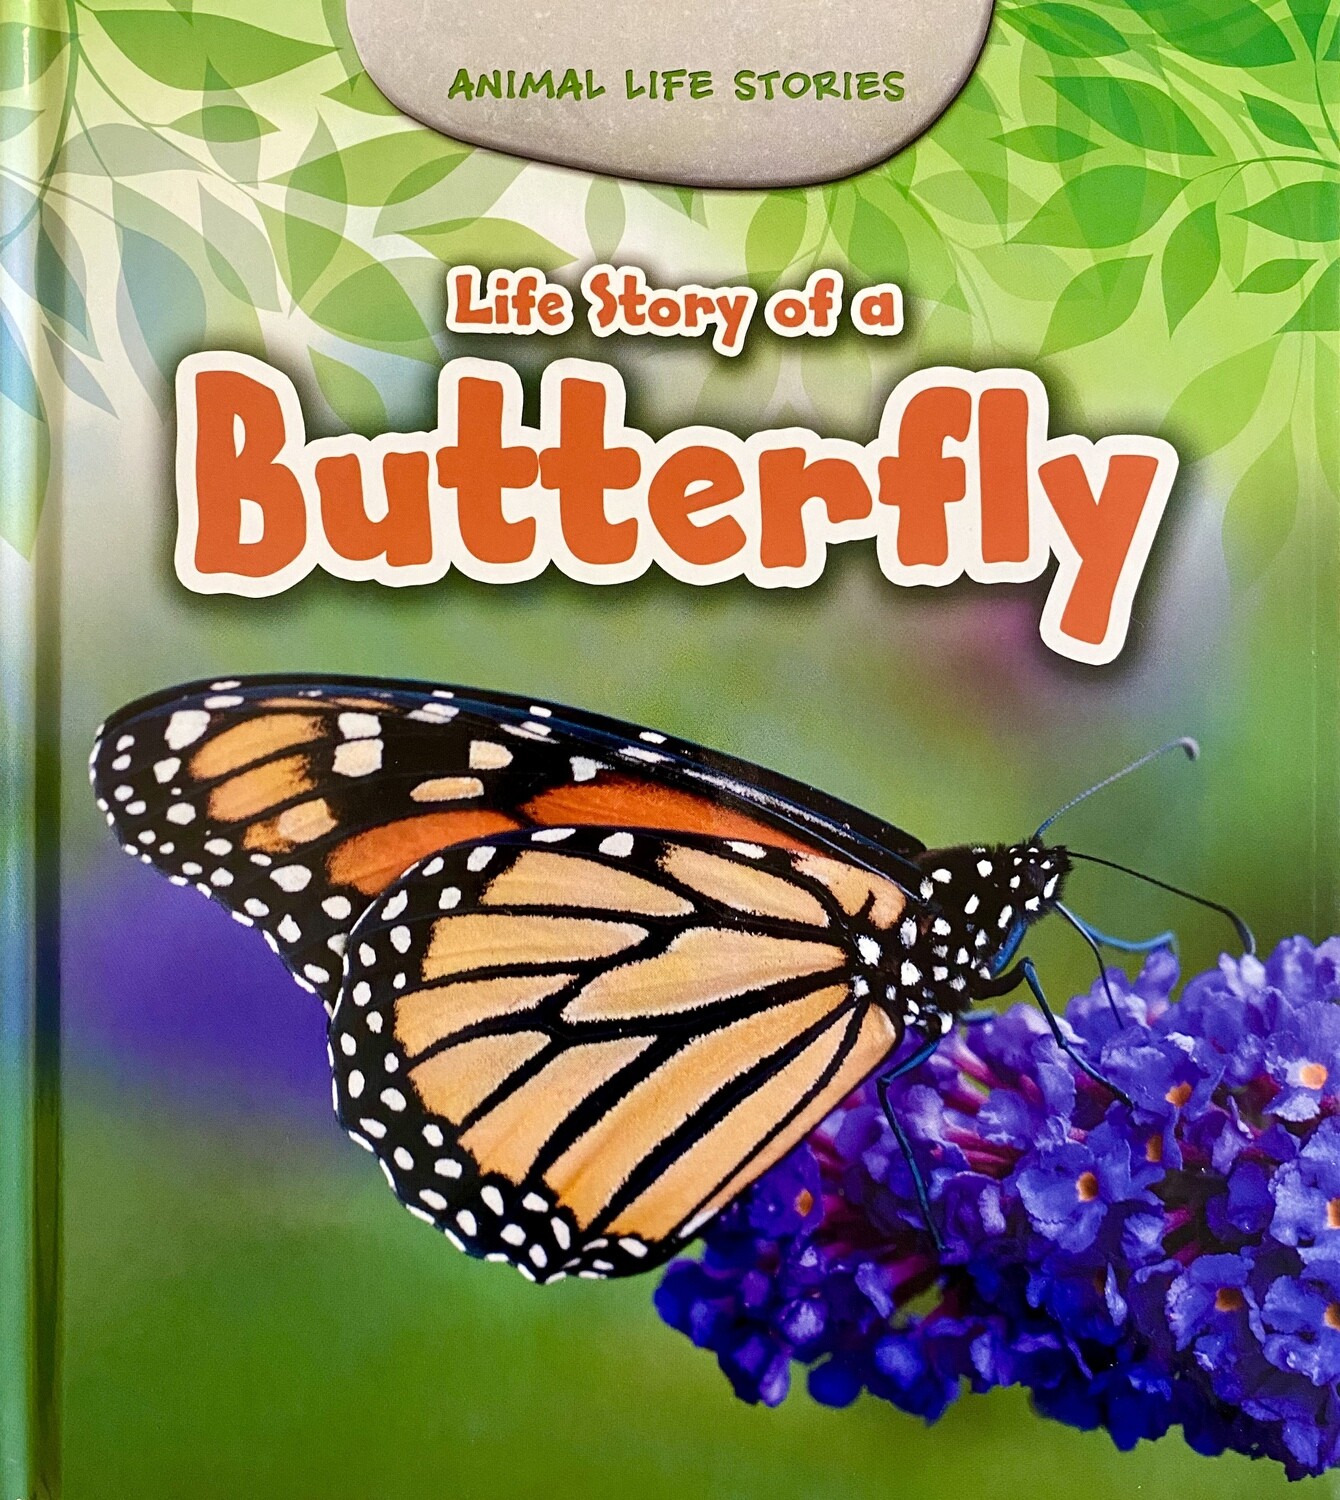 Animal Life Stories: Life Story of a Butterfly